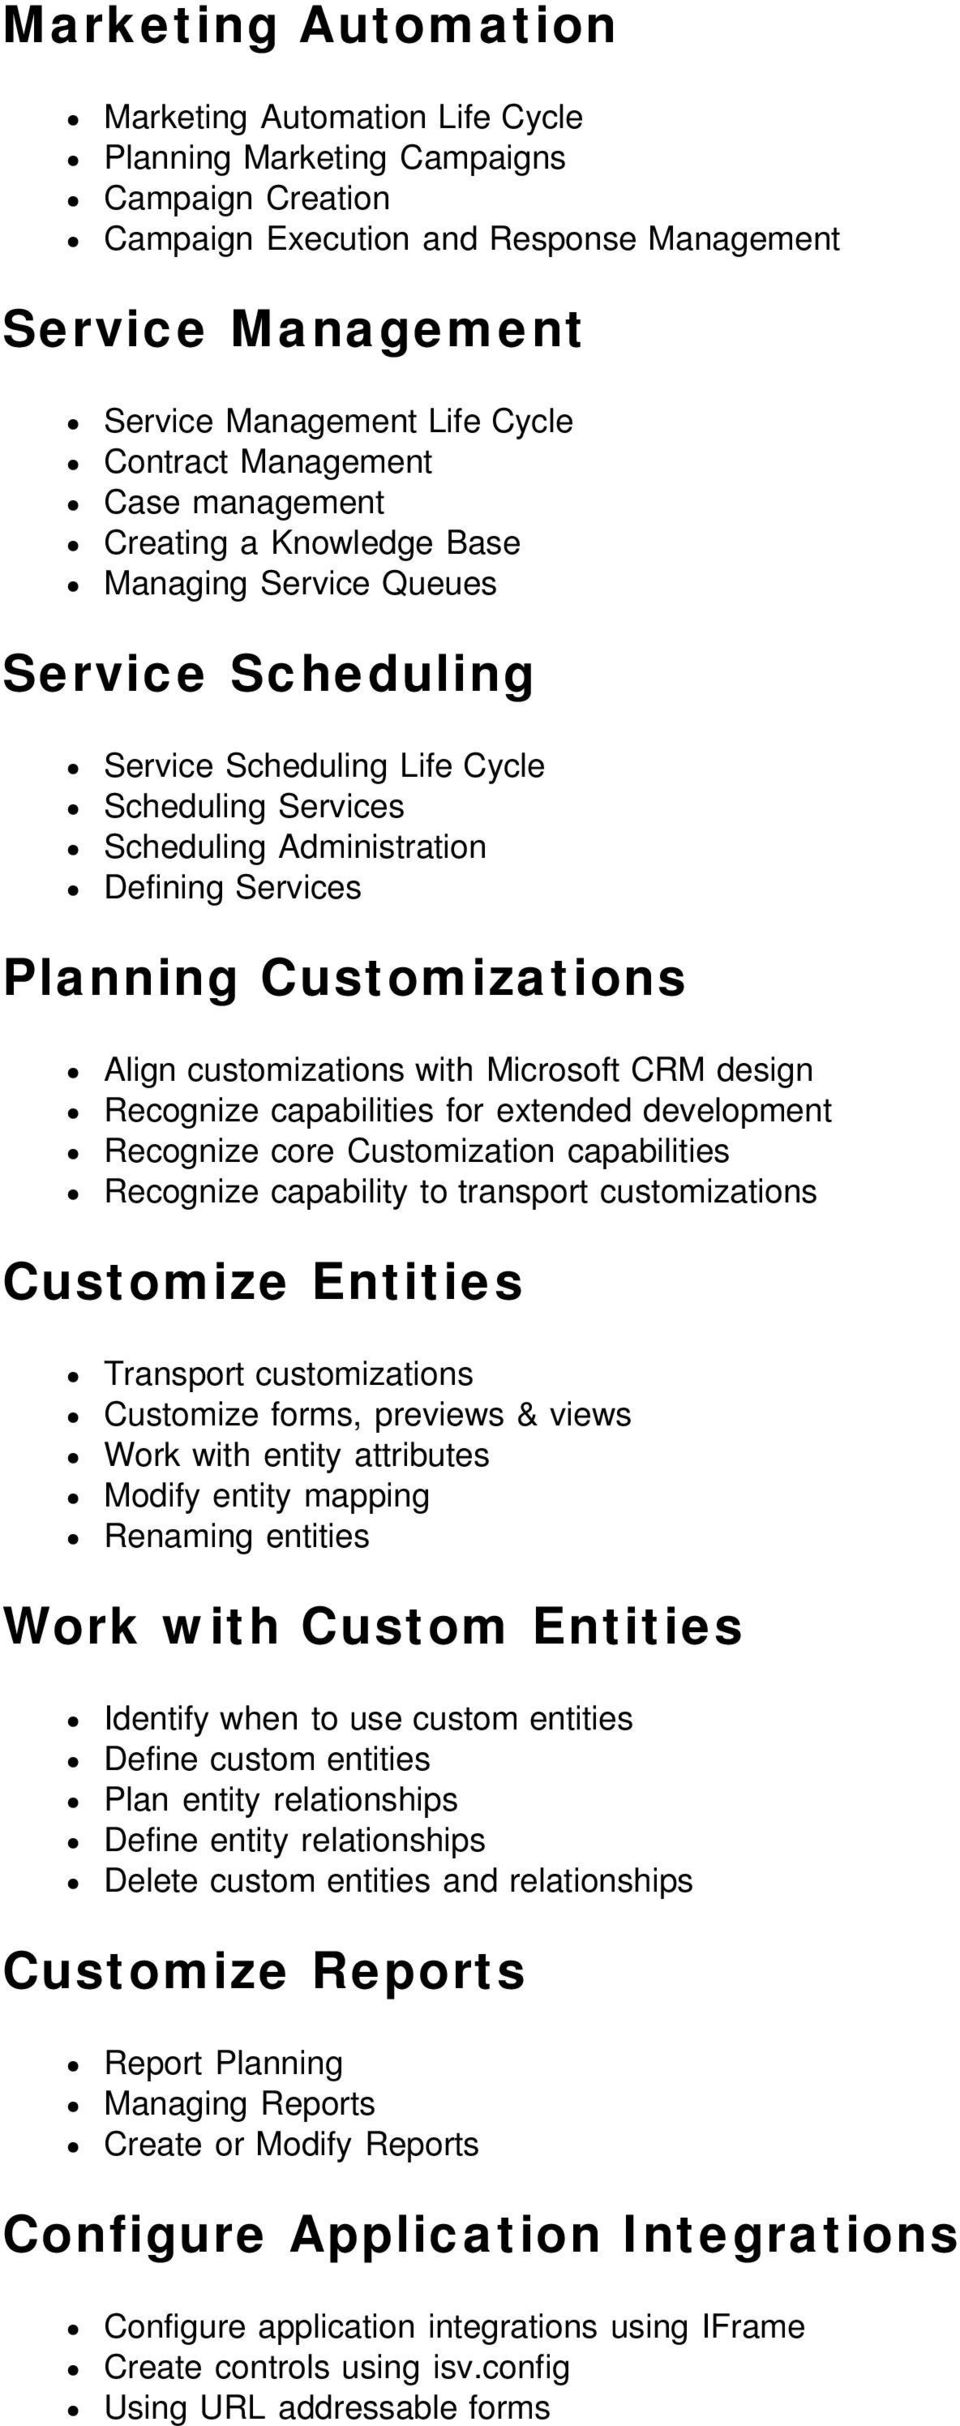 Planning Customizations Align customizations with Microsoft CRM design Recognize capabilities for extended development Recognize core Customization capabilities Recognize capability to transport